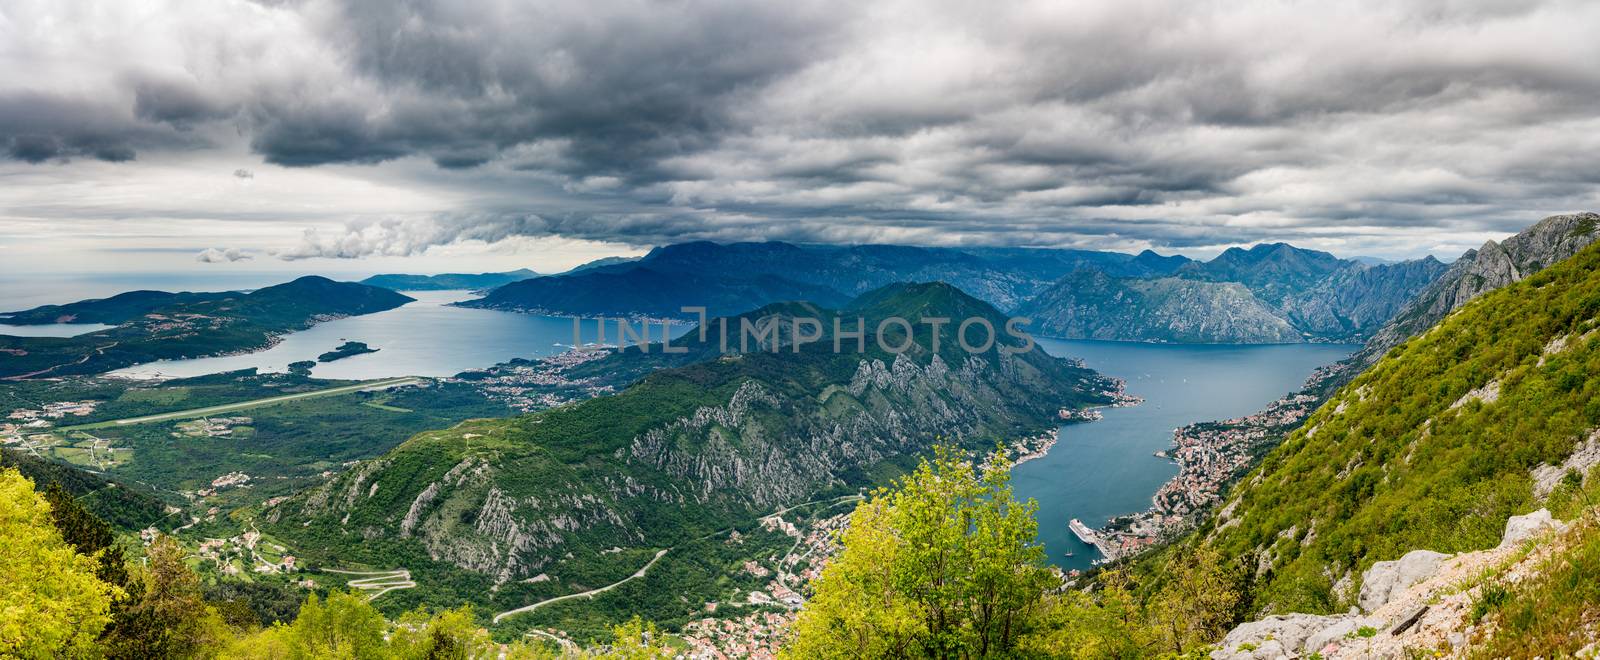 View of Bay of Kotor from Serpentine road by steheap